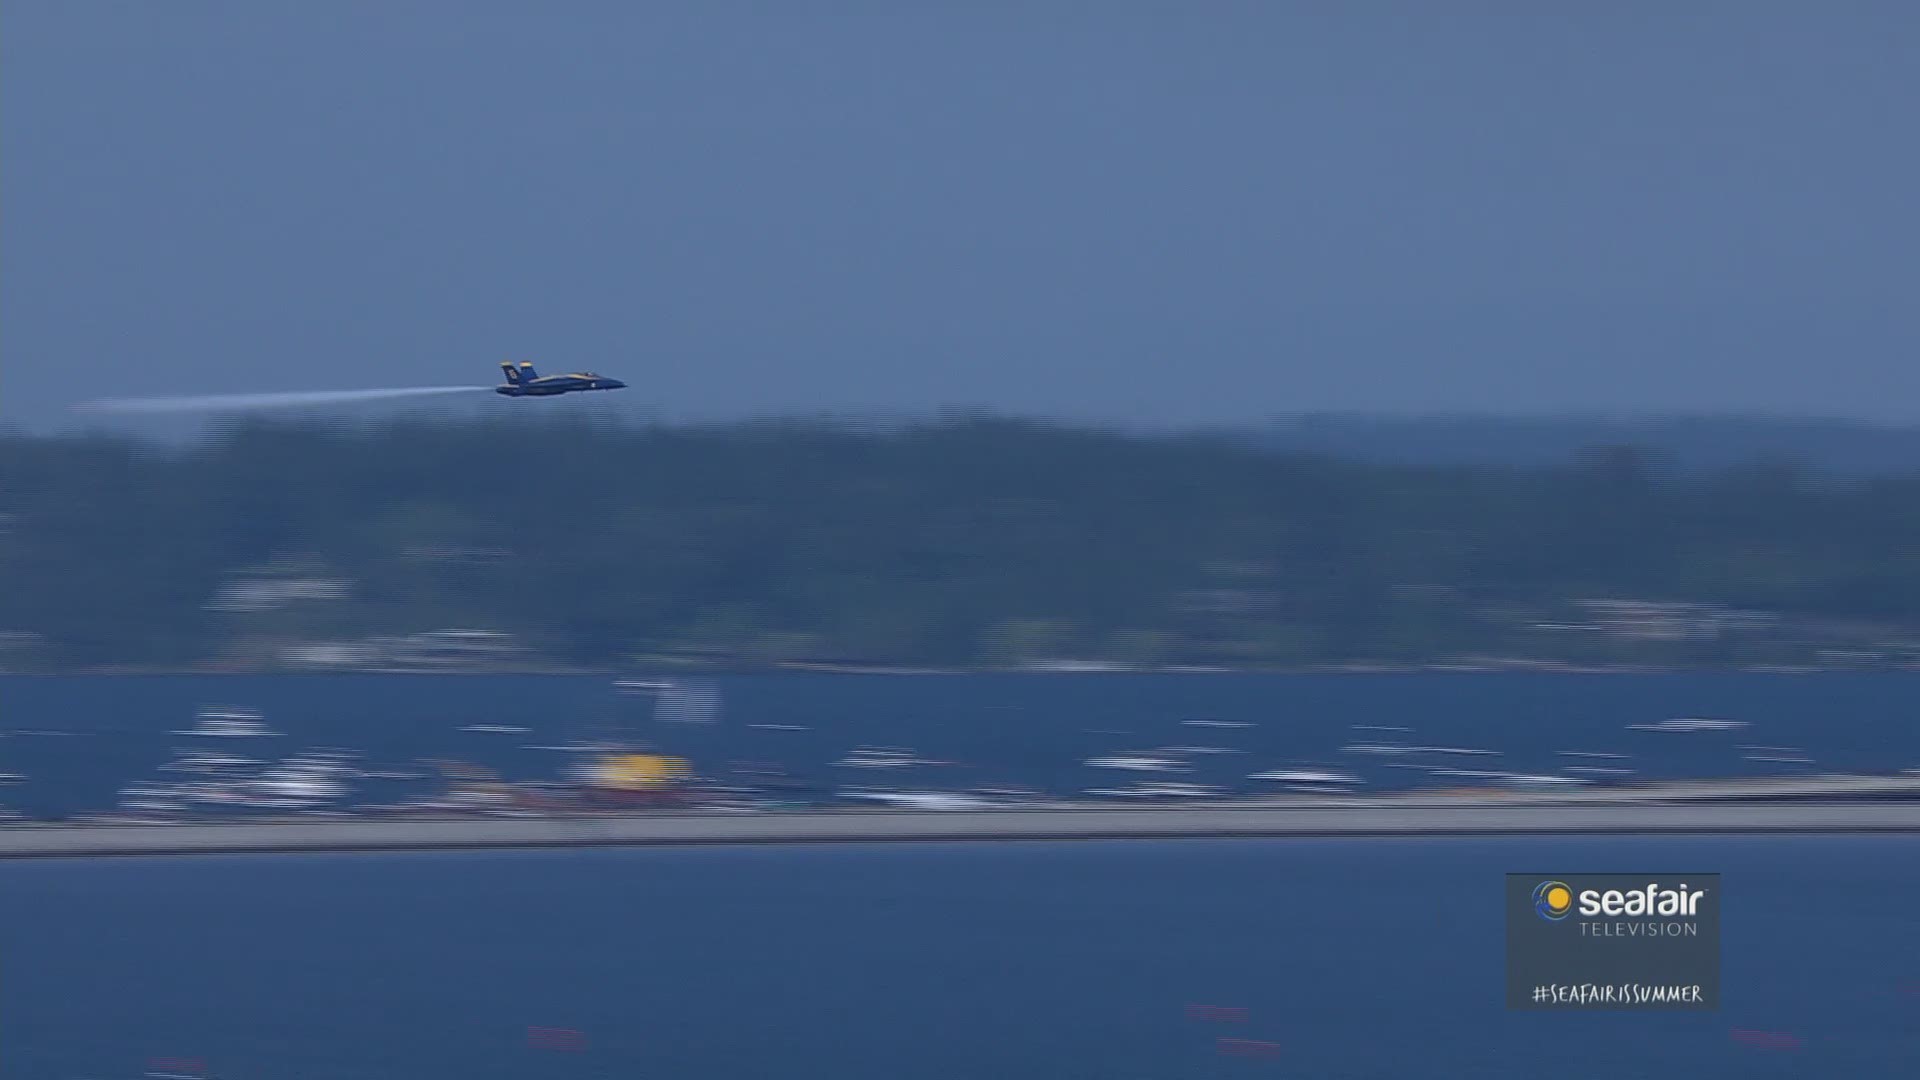 Watch the U.S. Navy Blue Angels soar over Seattle on the finale of Seafair in Seattle. This year marks the 70 anniversary of Seafair in the Pacific Northwest.